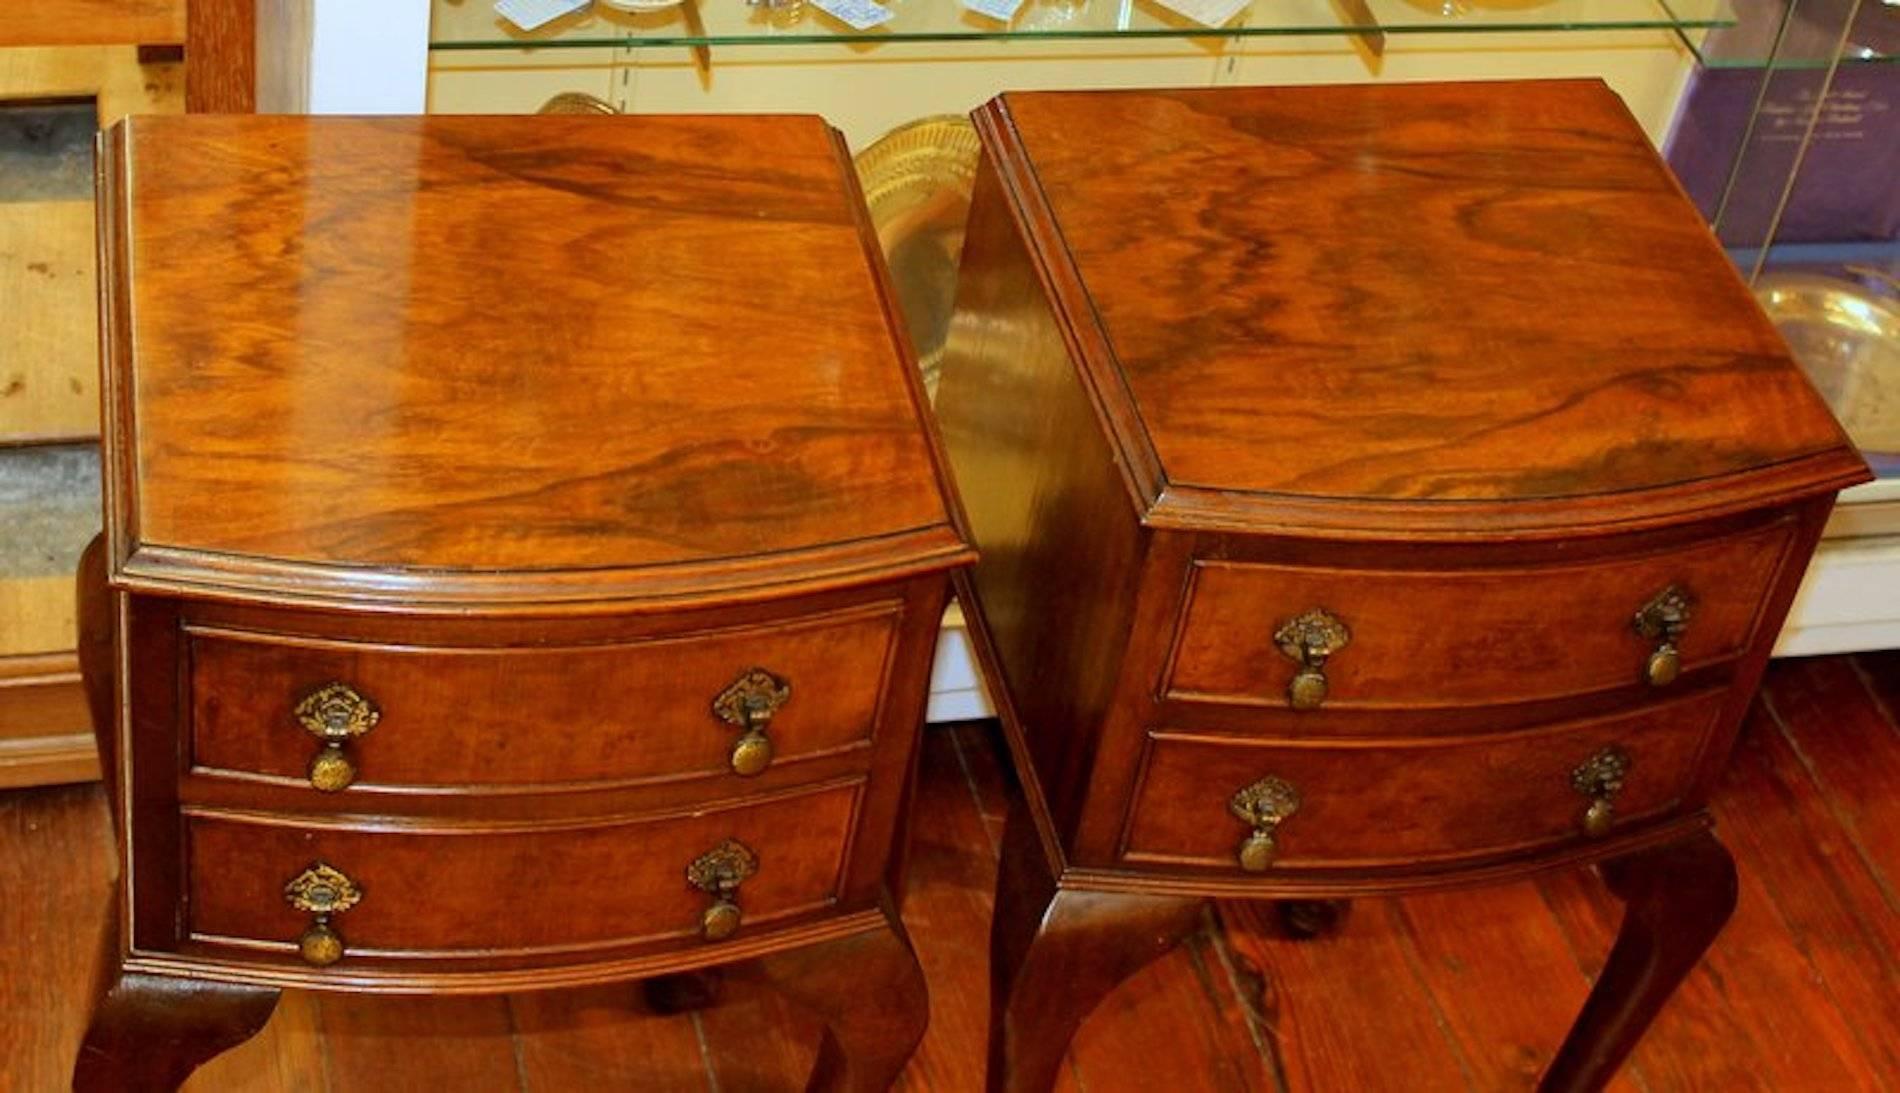 Pair of fine old English burr walnut Queen Anne style bedside or chairside tables with bookmatched burr walnut throughout standing upon cabriole legs. Original brass drop handles, circa 1920-1930.